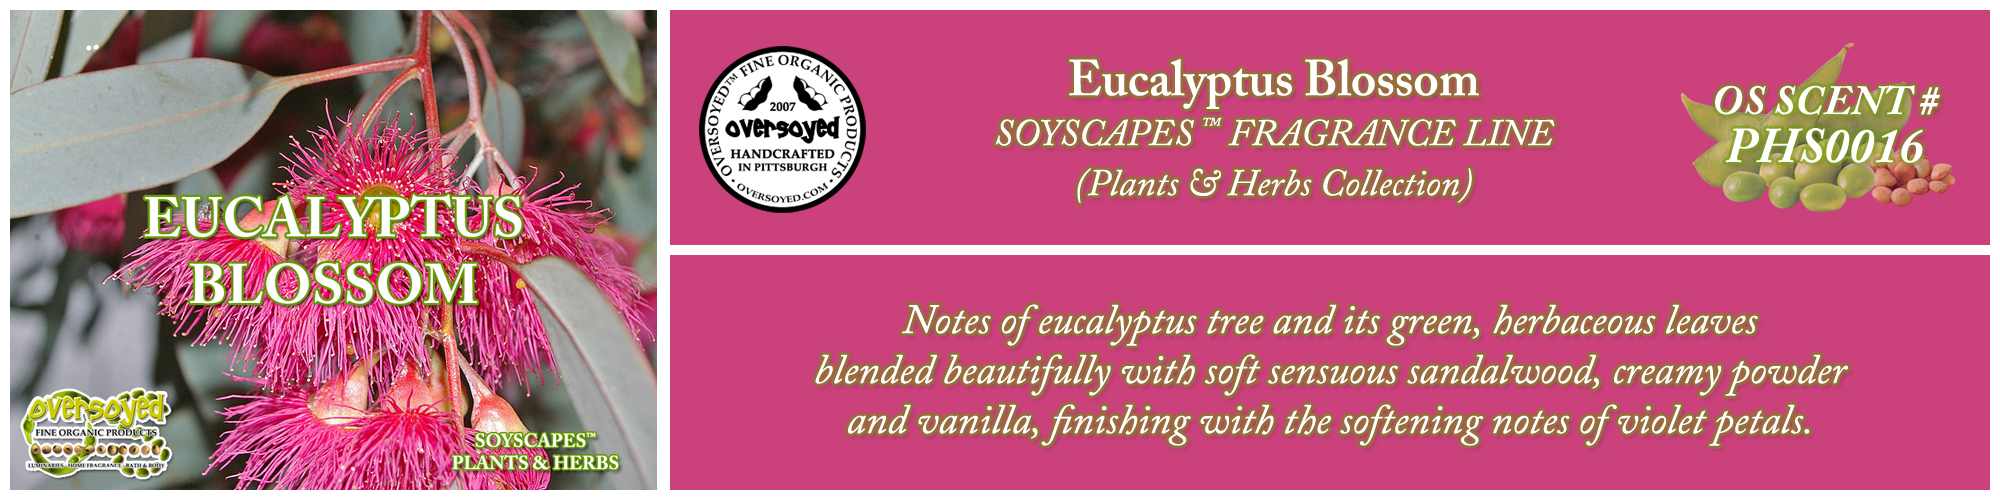 Eucalyptus Blossom Handcrafted Products Collection